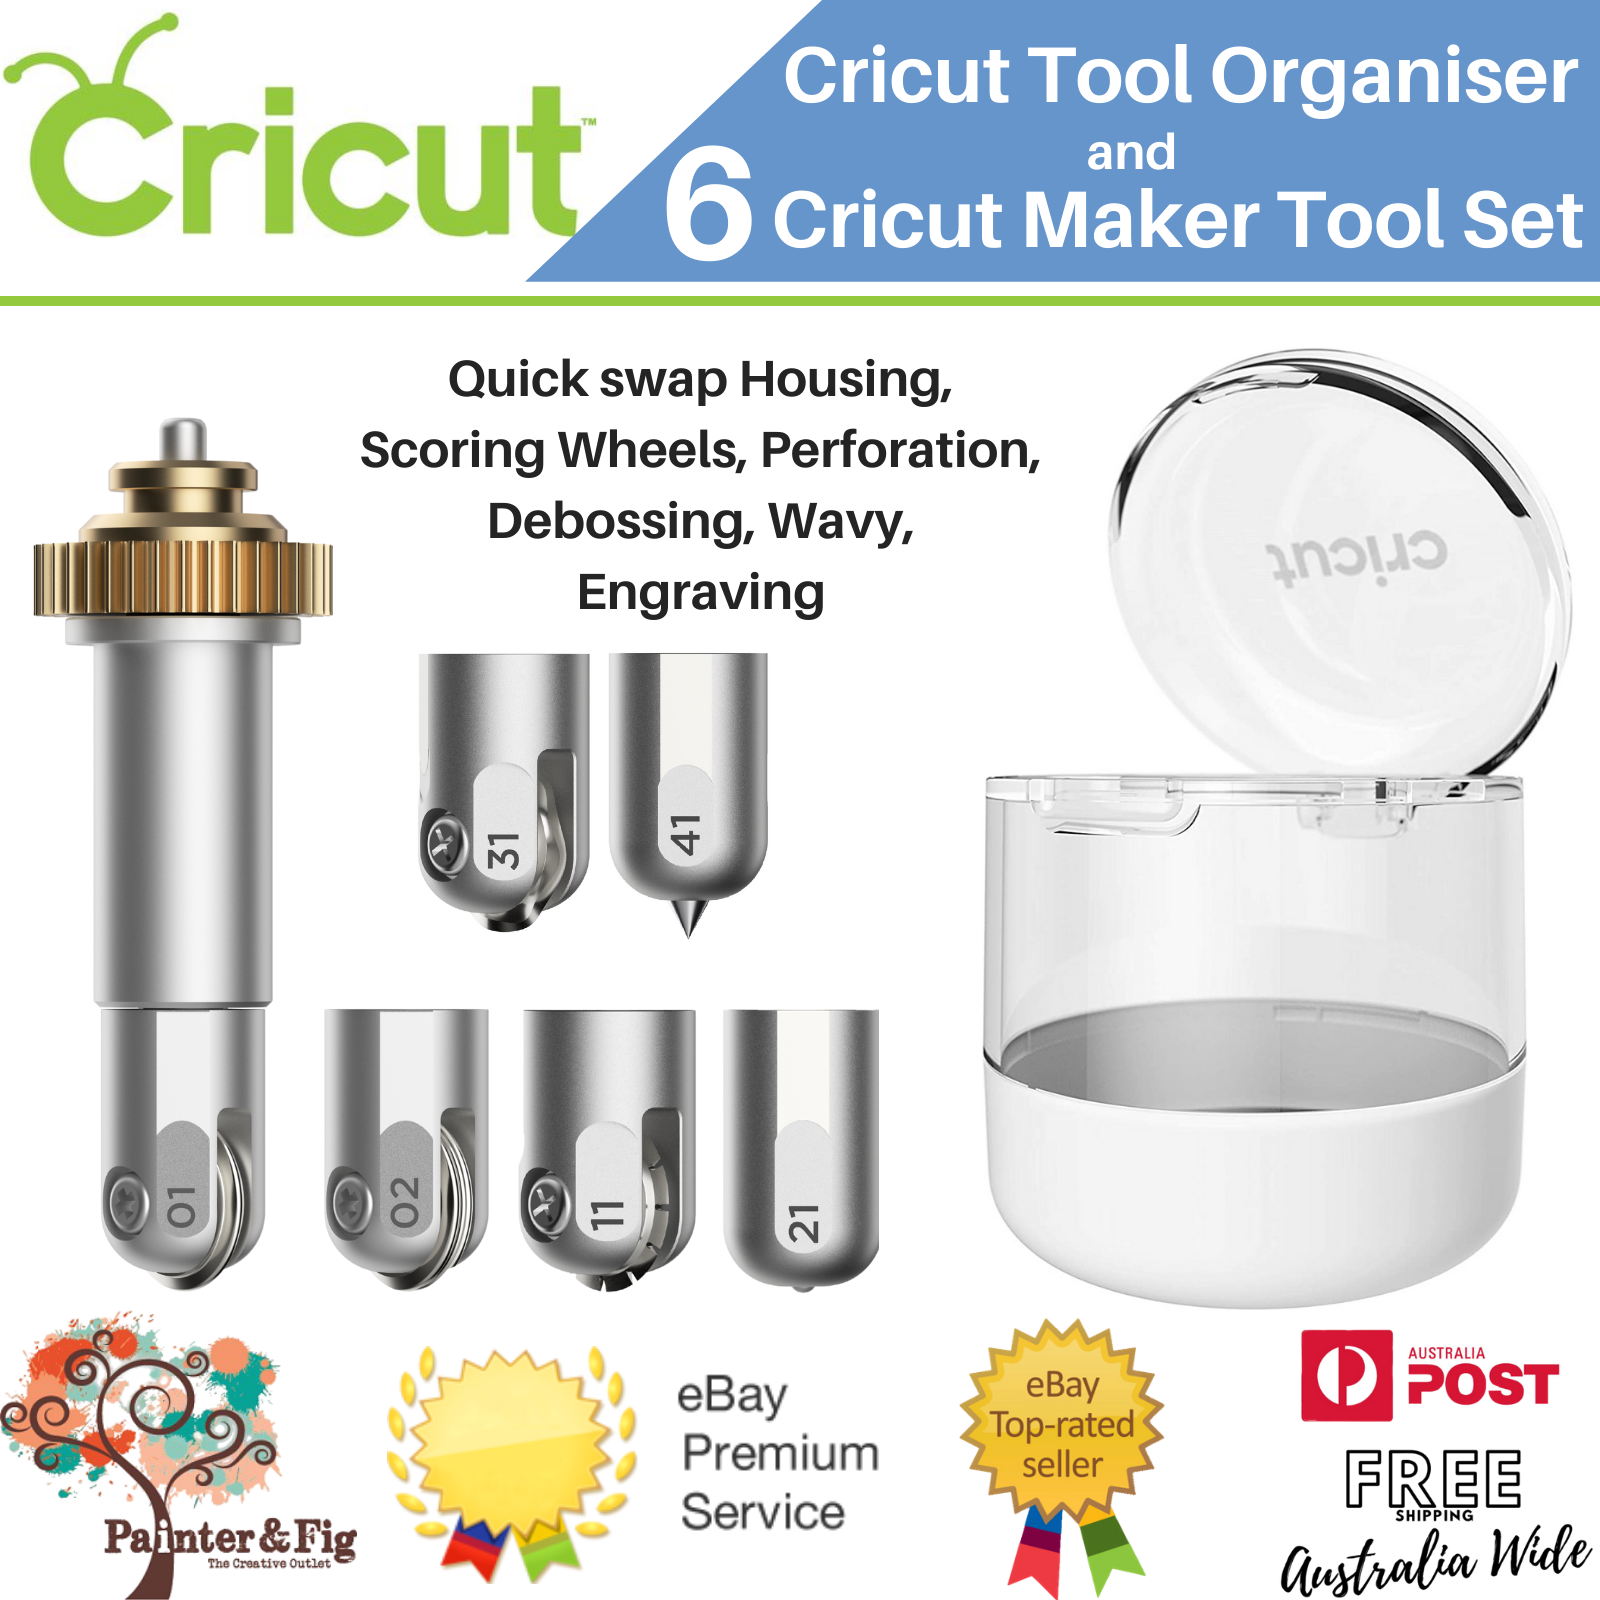 Cricut Maker QuickSwap Housing with Perforation Blade, Engraving Tip and Fine Debossing Tip Bundle - Create Custom Raffle Tickets, Cards and Engraving